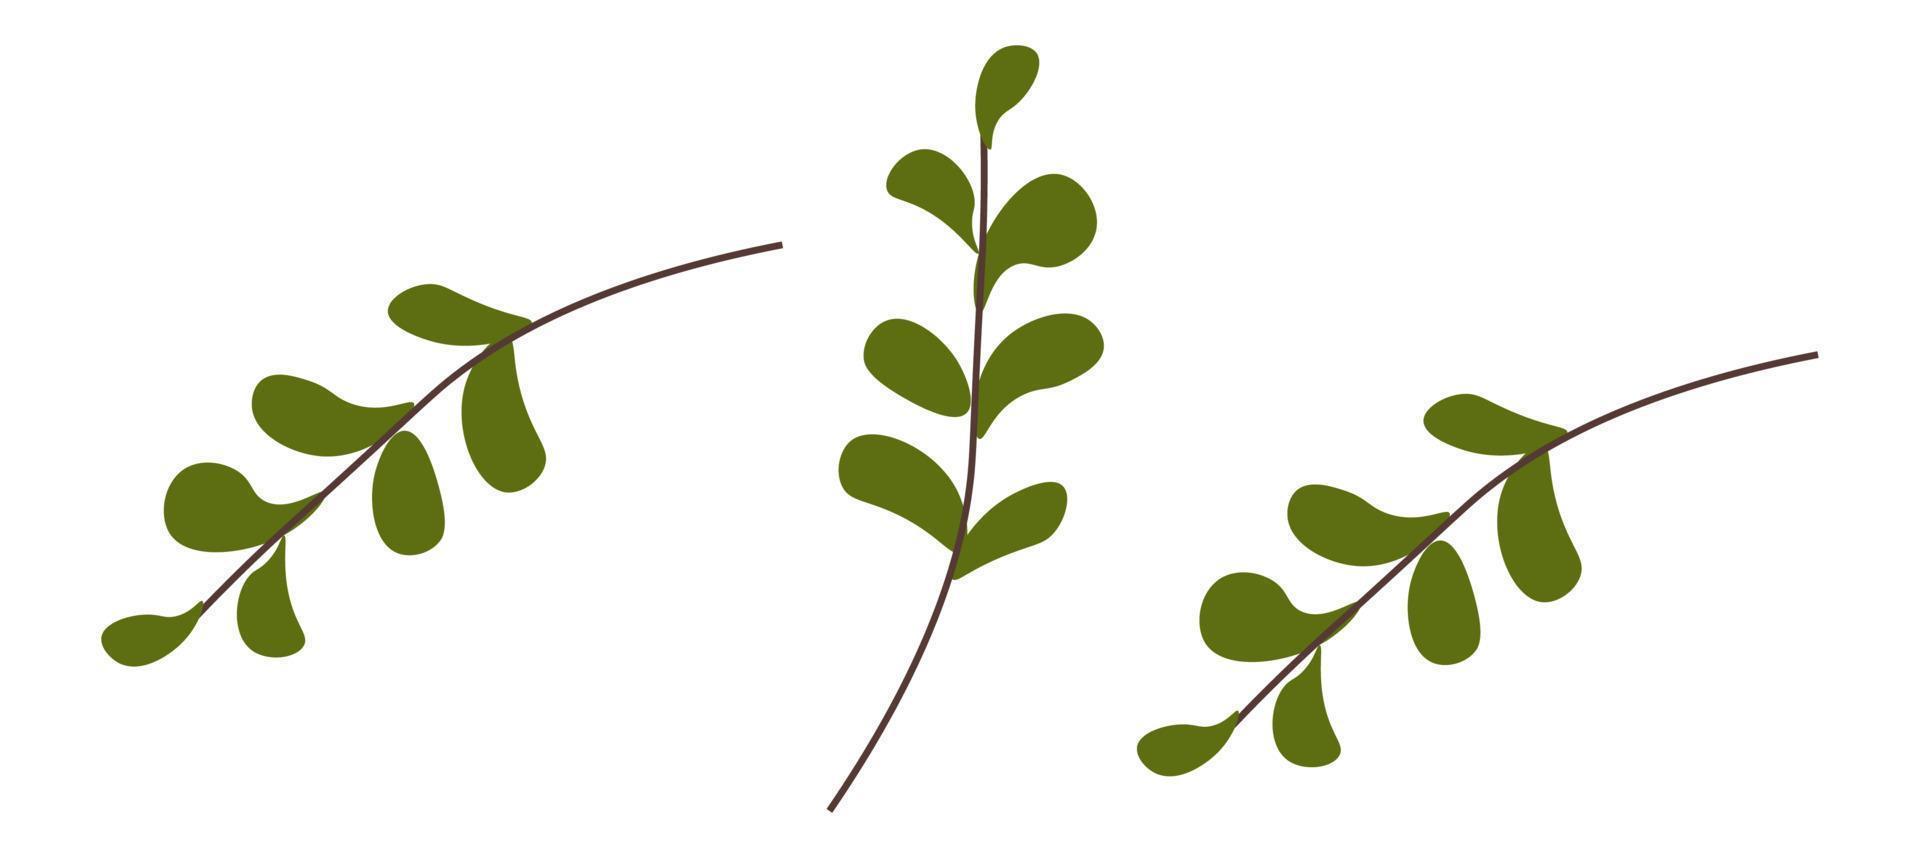 Herbs for cooking, greenery for seasoning food vector